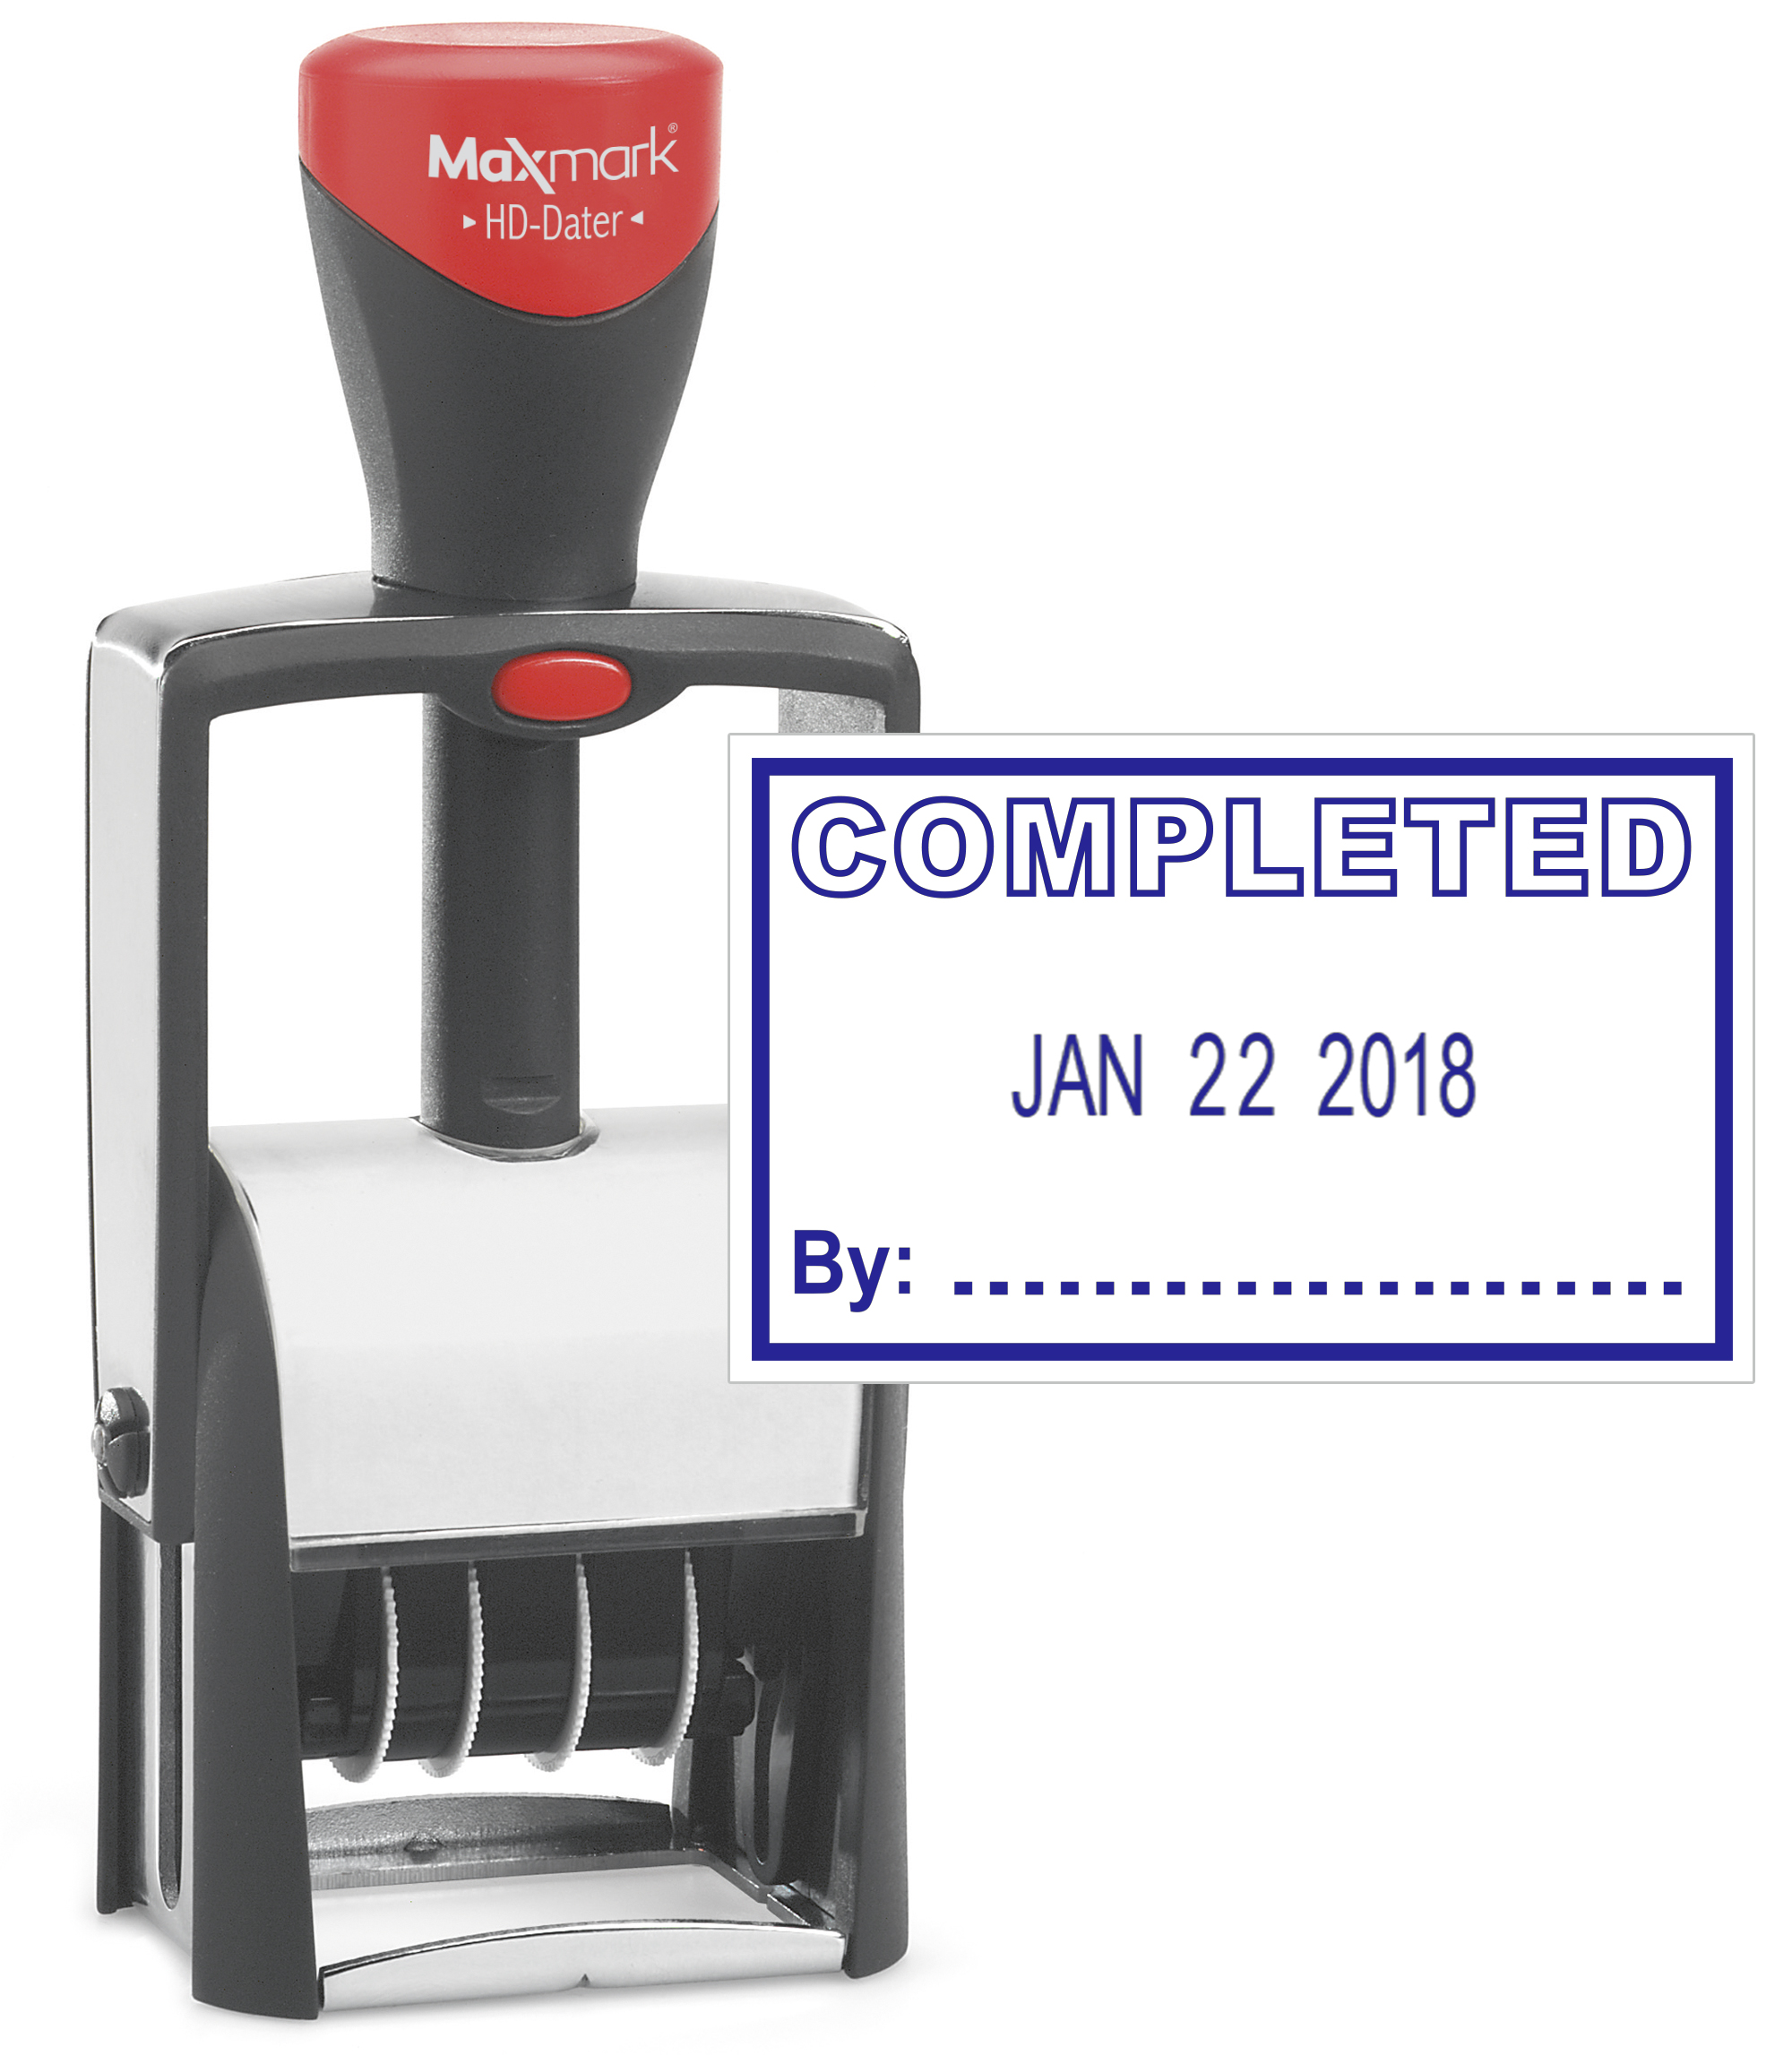 Heavy Duty Date Stamp with "COMPLETED" Self Inking Stamp - BLUE Ink